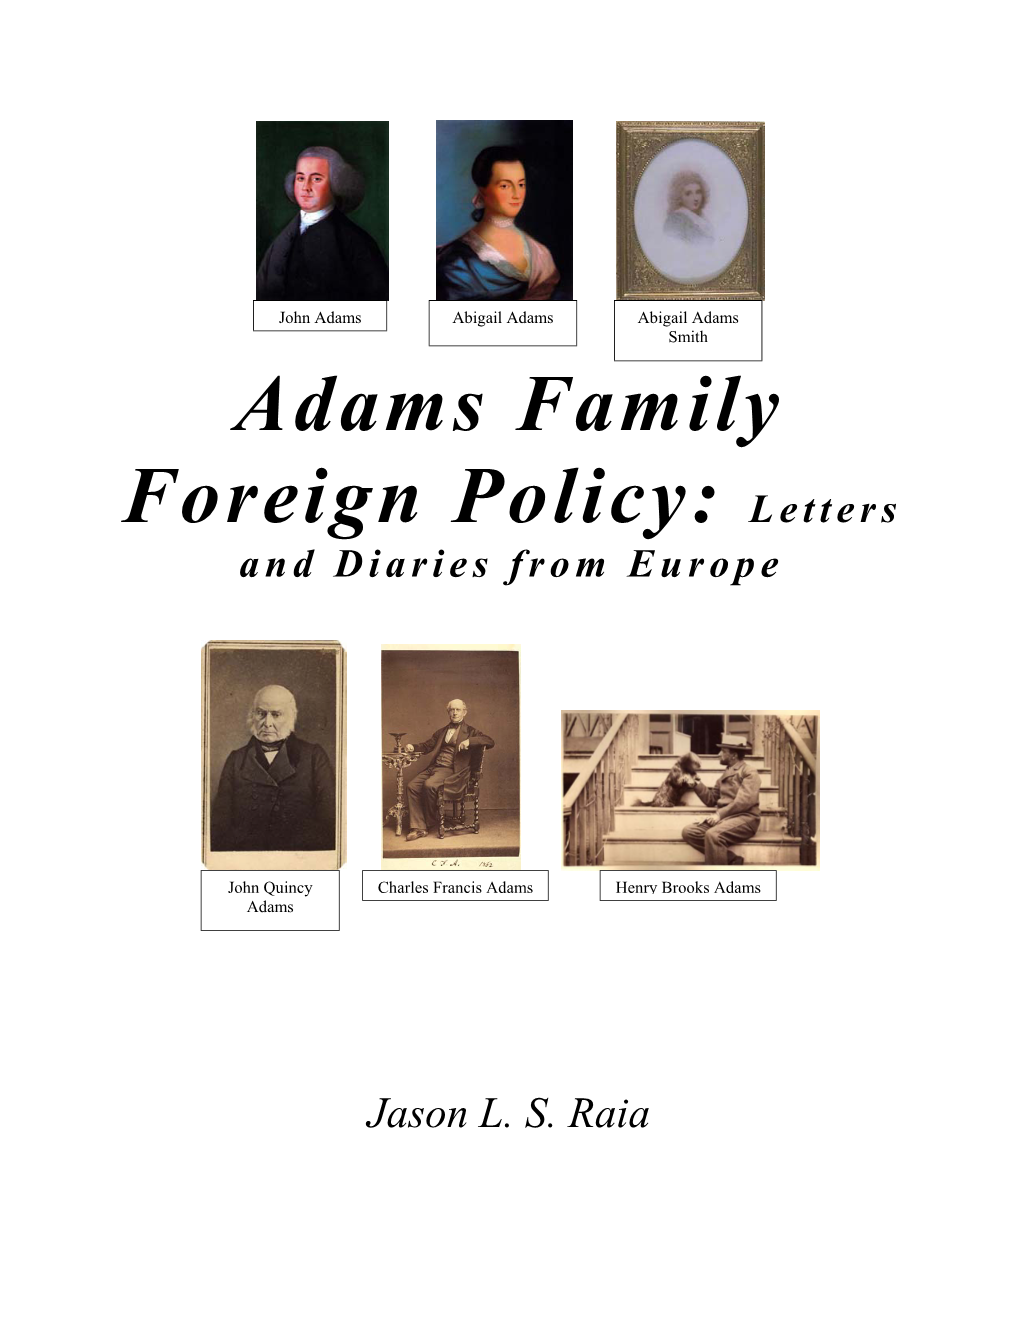 Adams Family Foreign Policy: Letters and Diaries from Europe